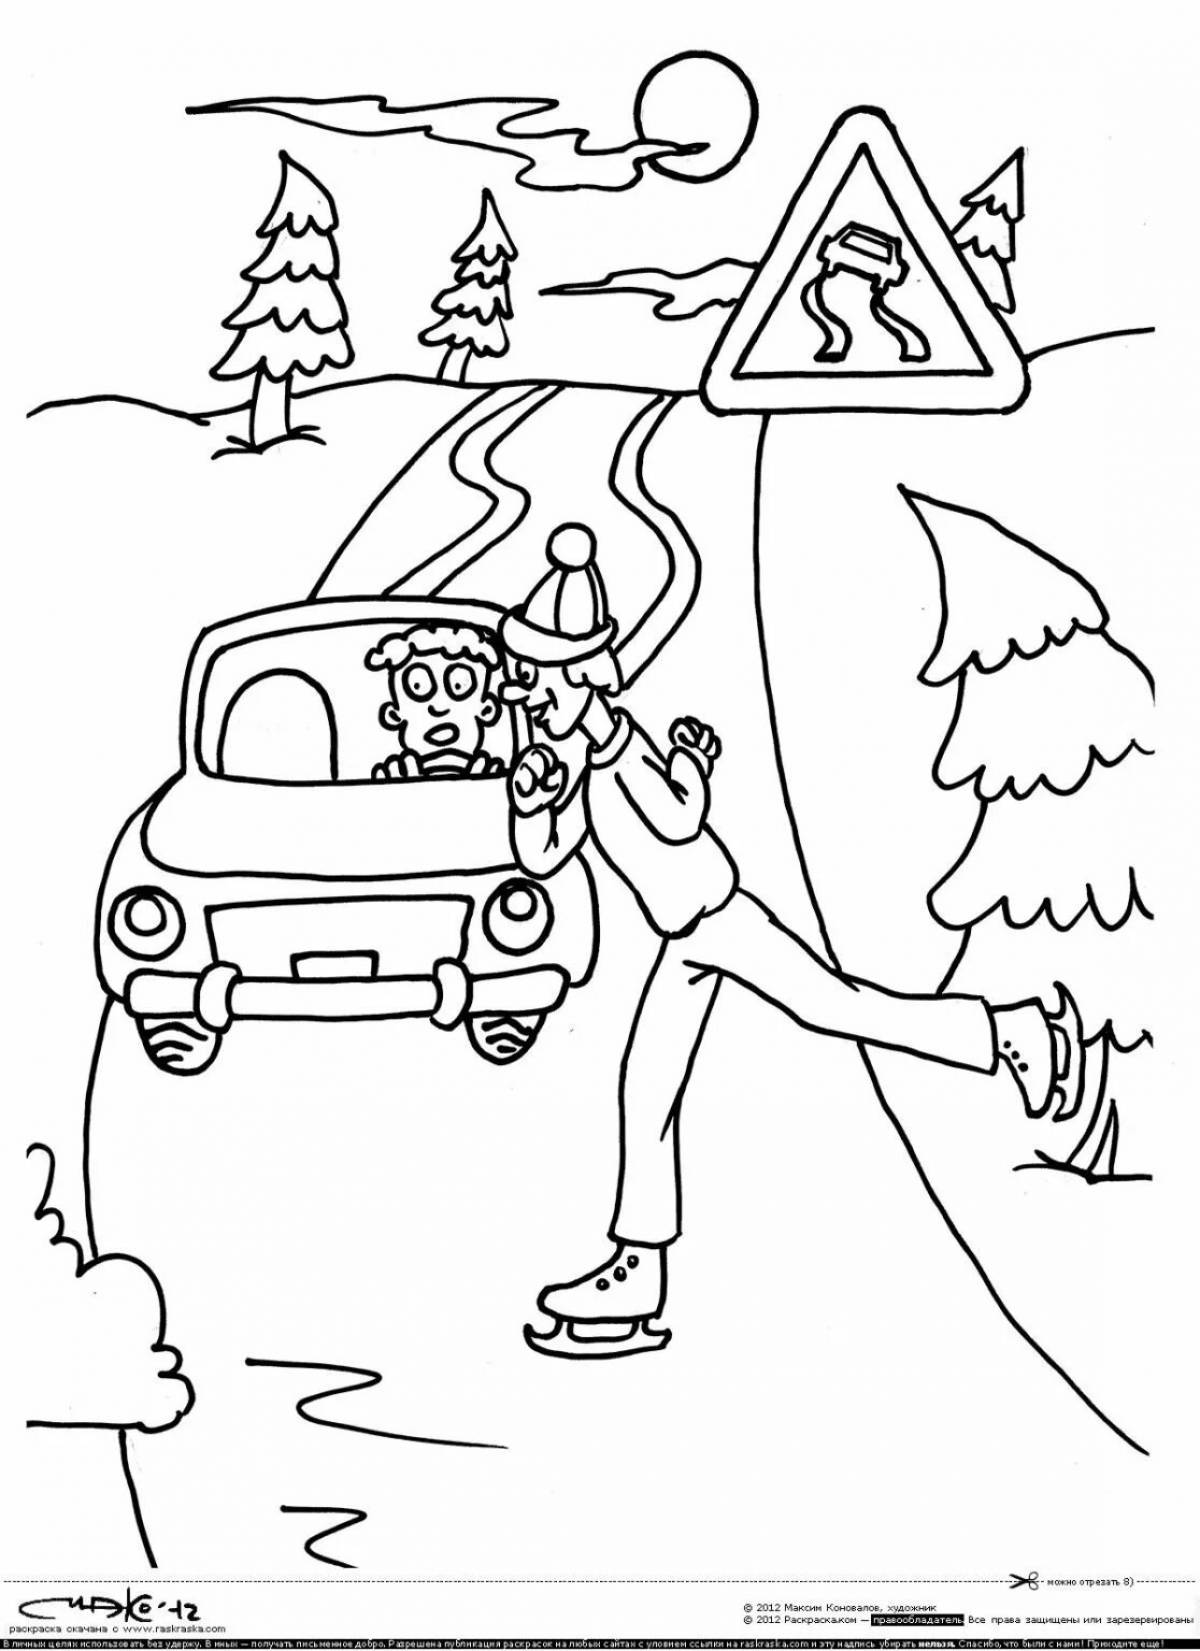 Colourful winter road coloring book for kids